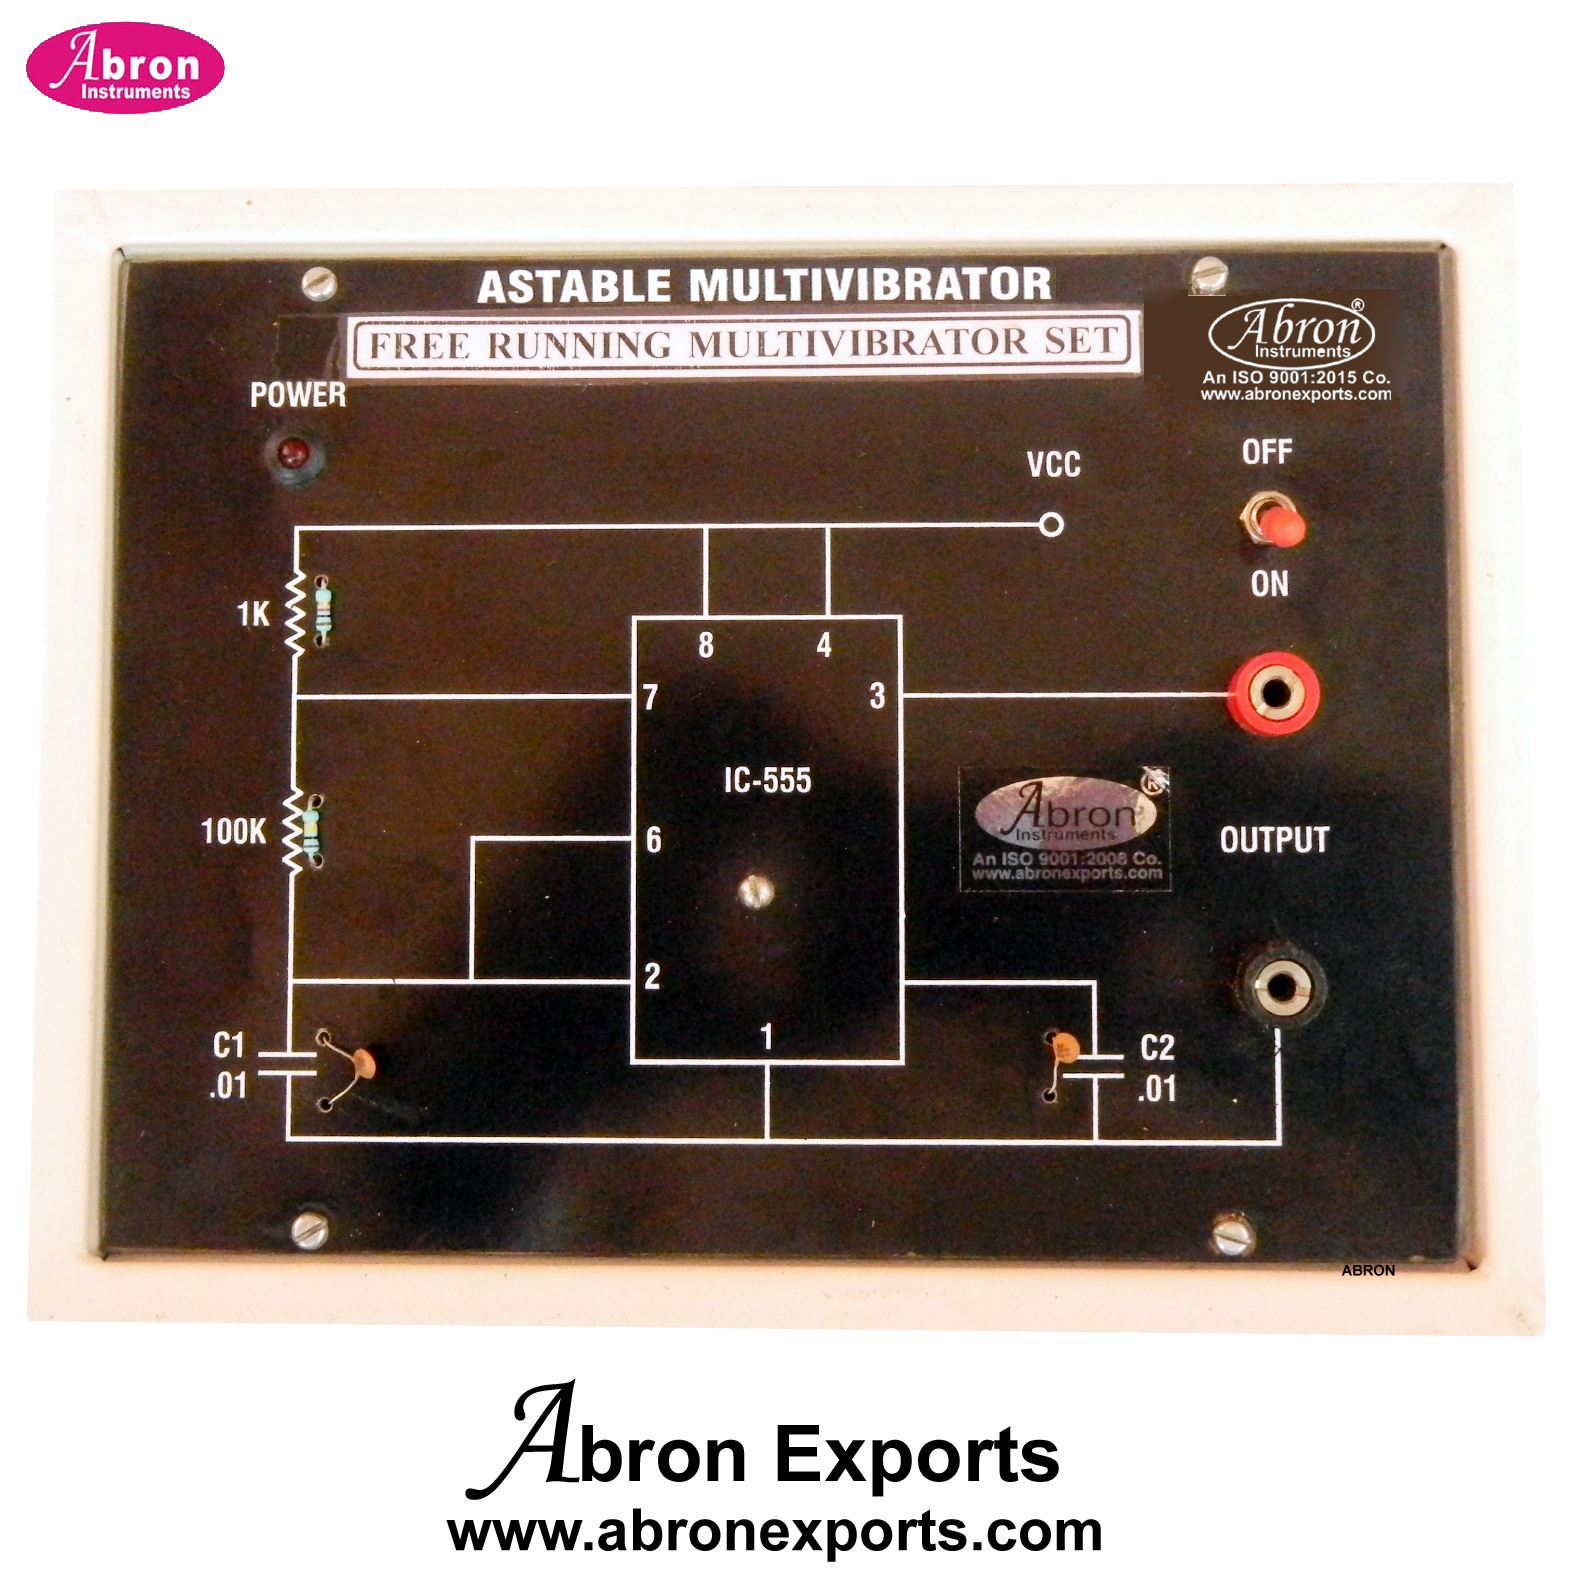 Multi Vibrator Astable Monostable Bistable Vibrator trainer IC 0-1 LED IC555 signal input output to CRO power supply AE-1258MA 